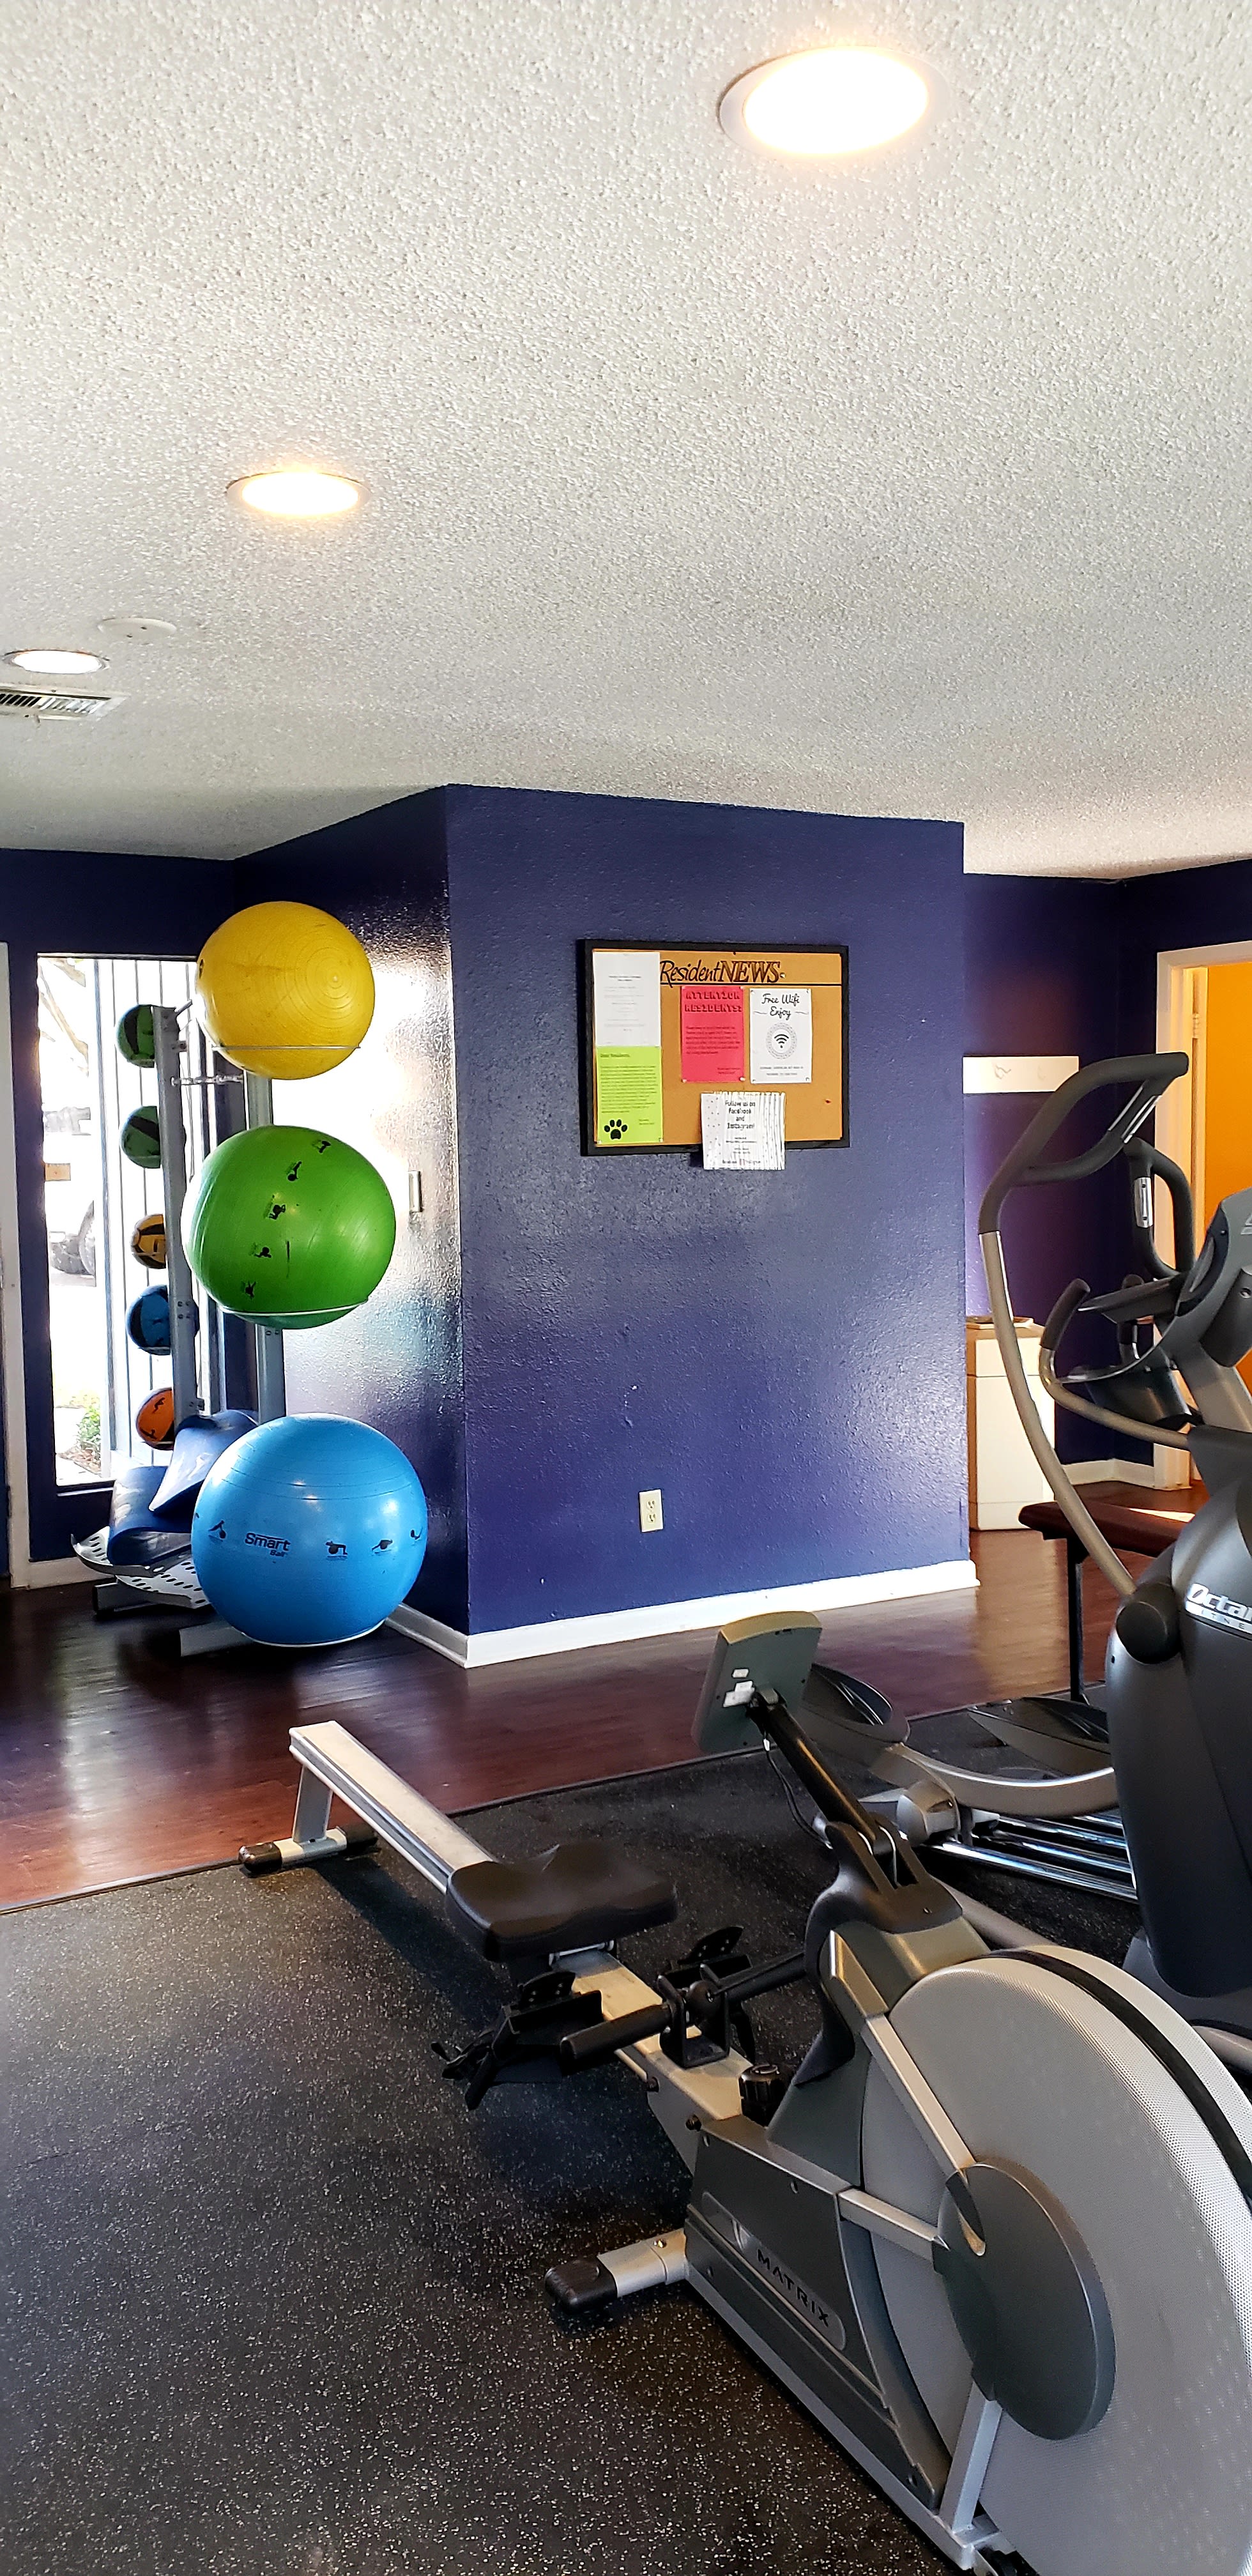 Fitness center at Willowick Apartments in College Station, Texas